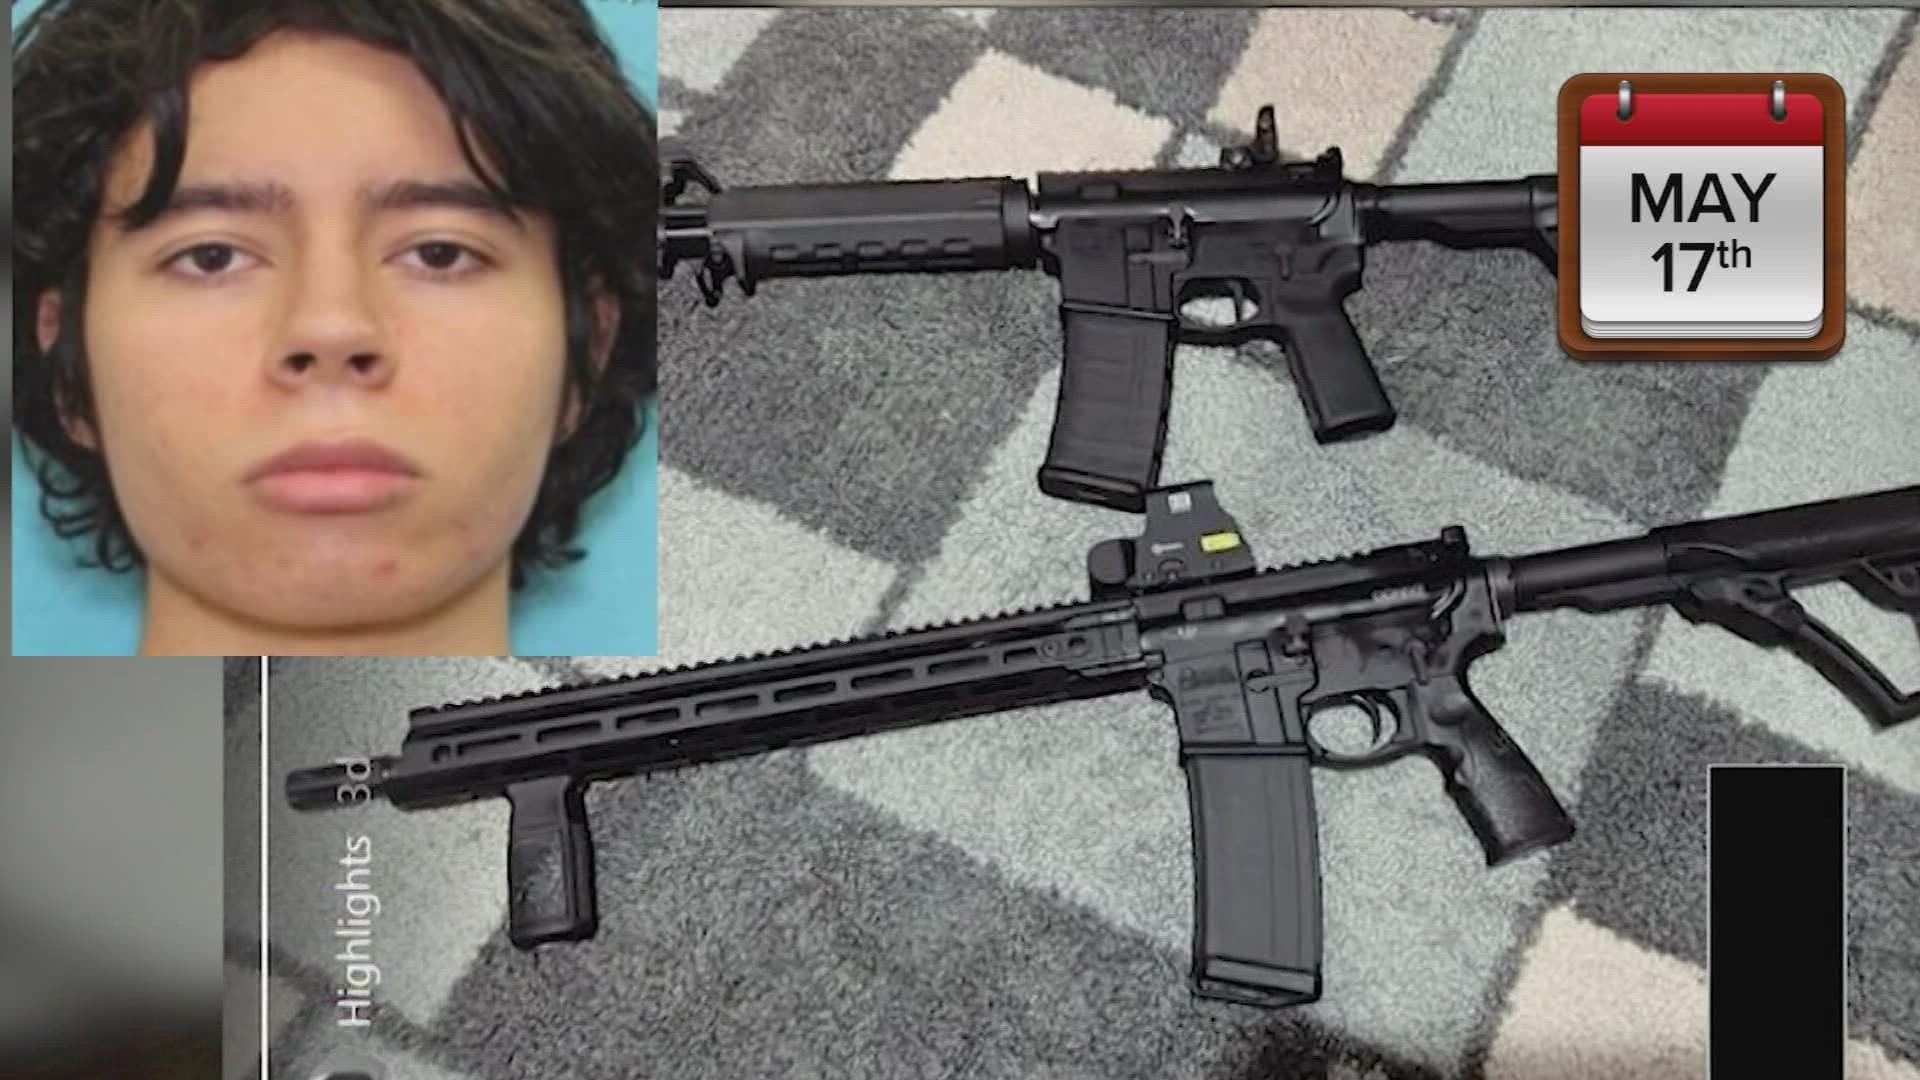 Some of the big questions people are asking right now are what we know about the gunman and how he got his weapons.